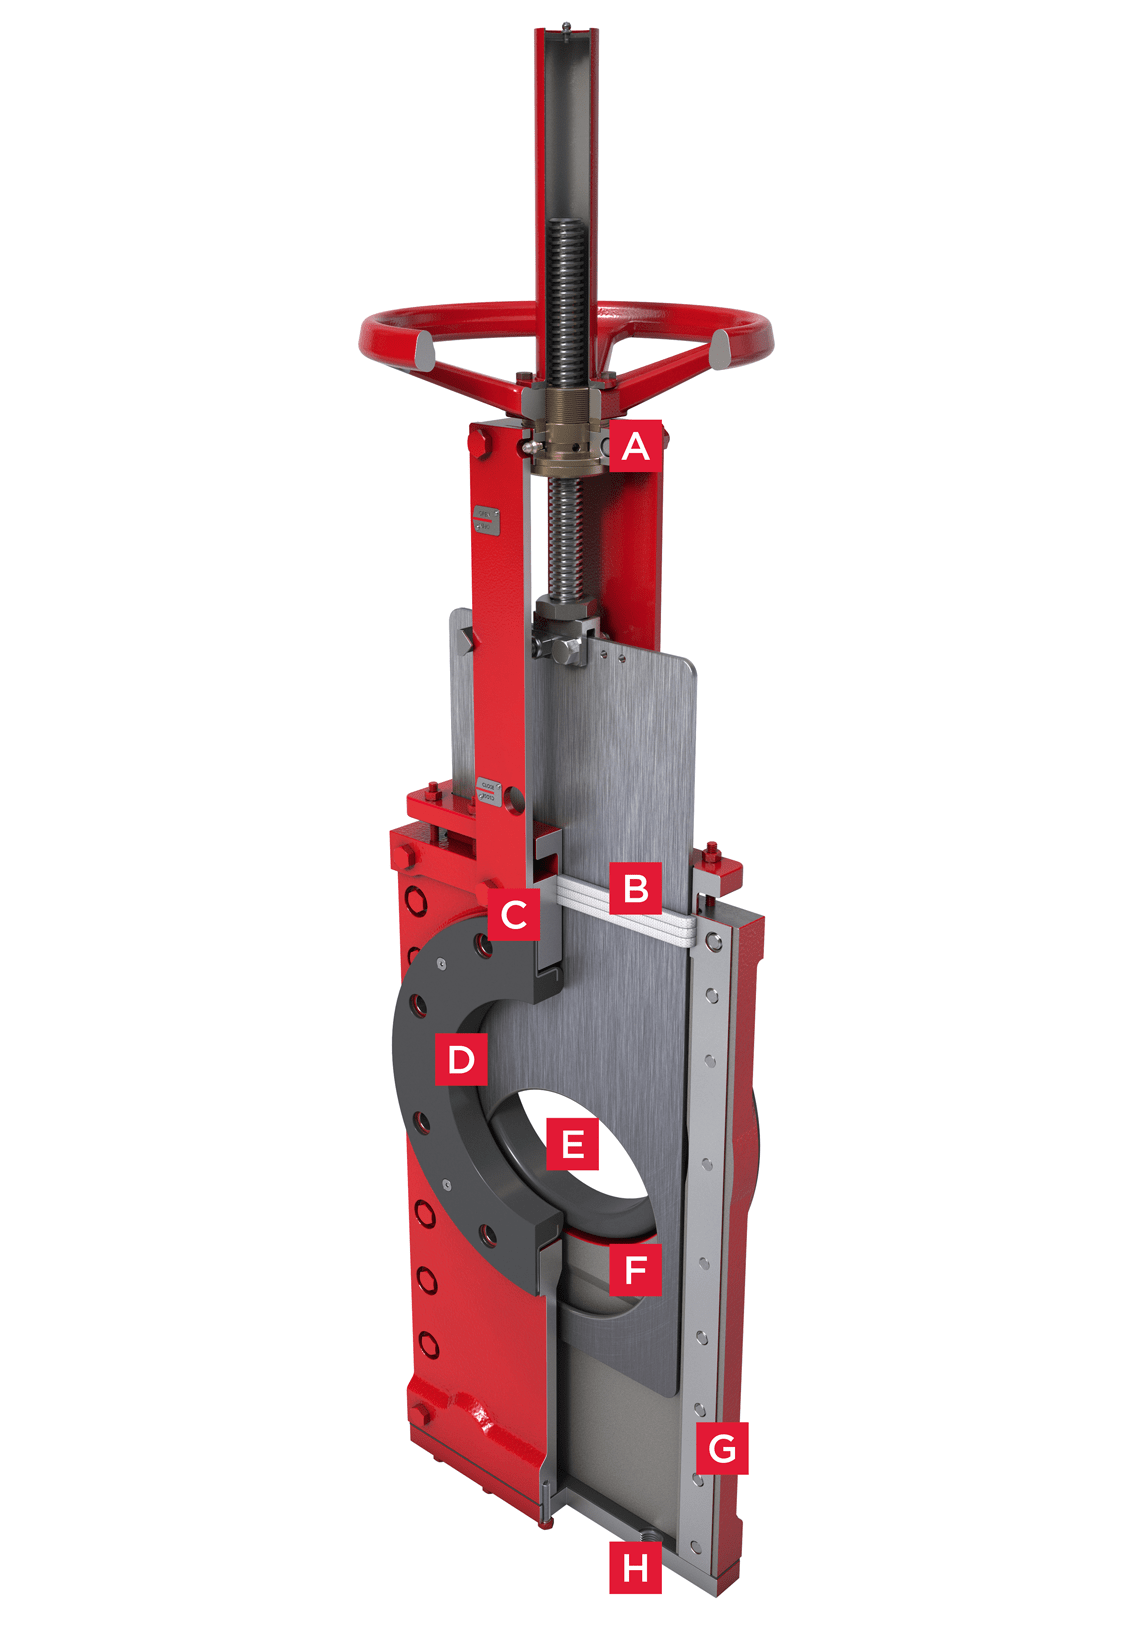 Bidirectional Knife Gate Valve Series 770 Features